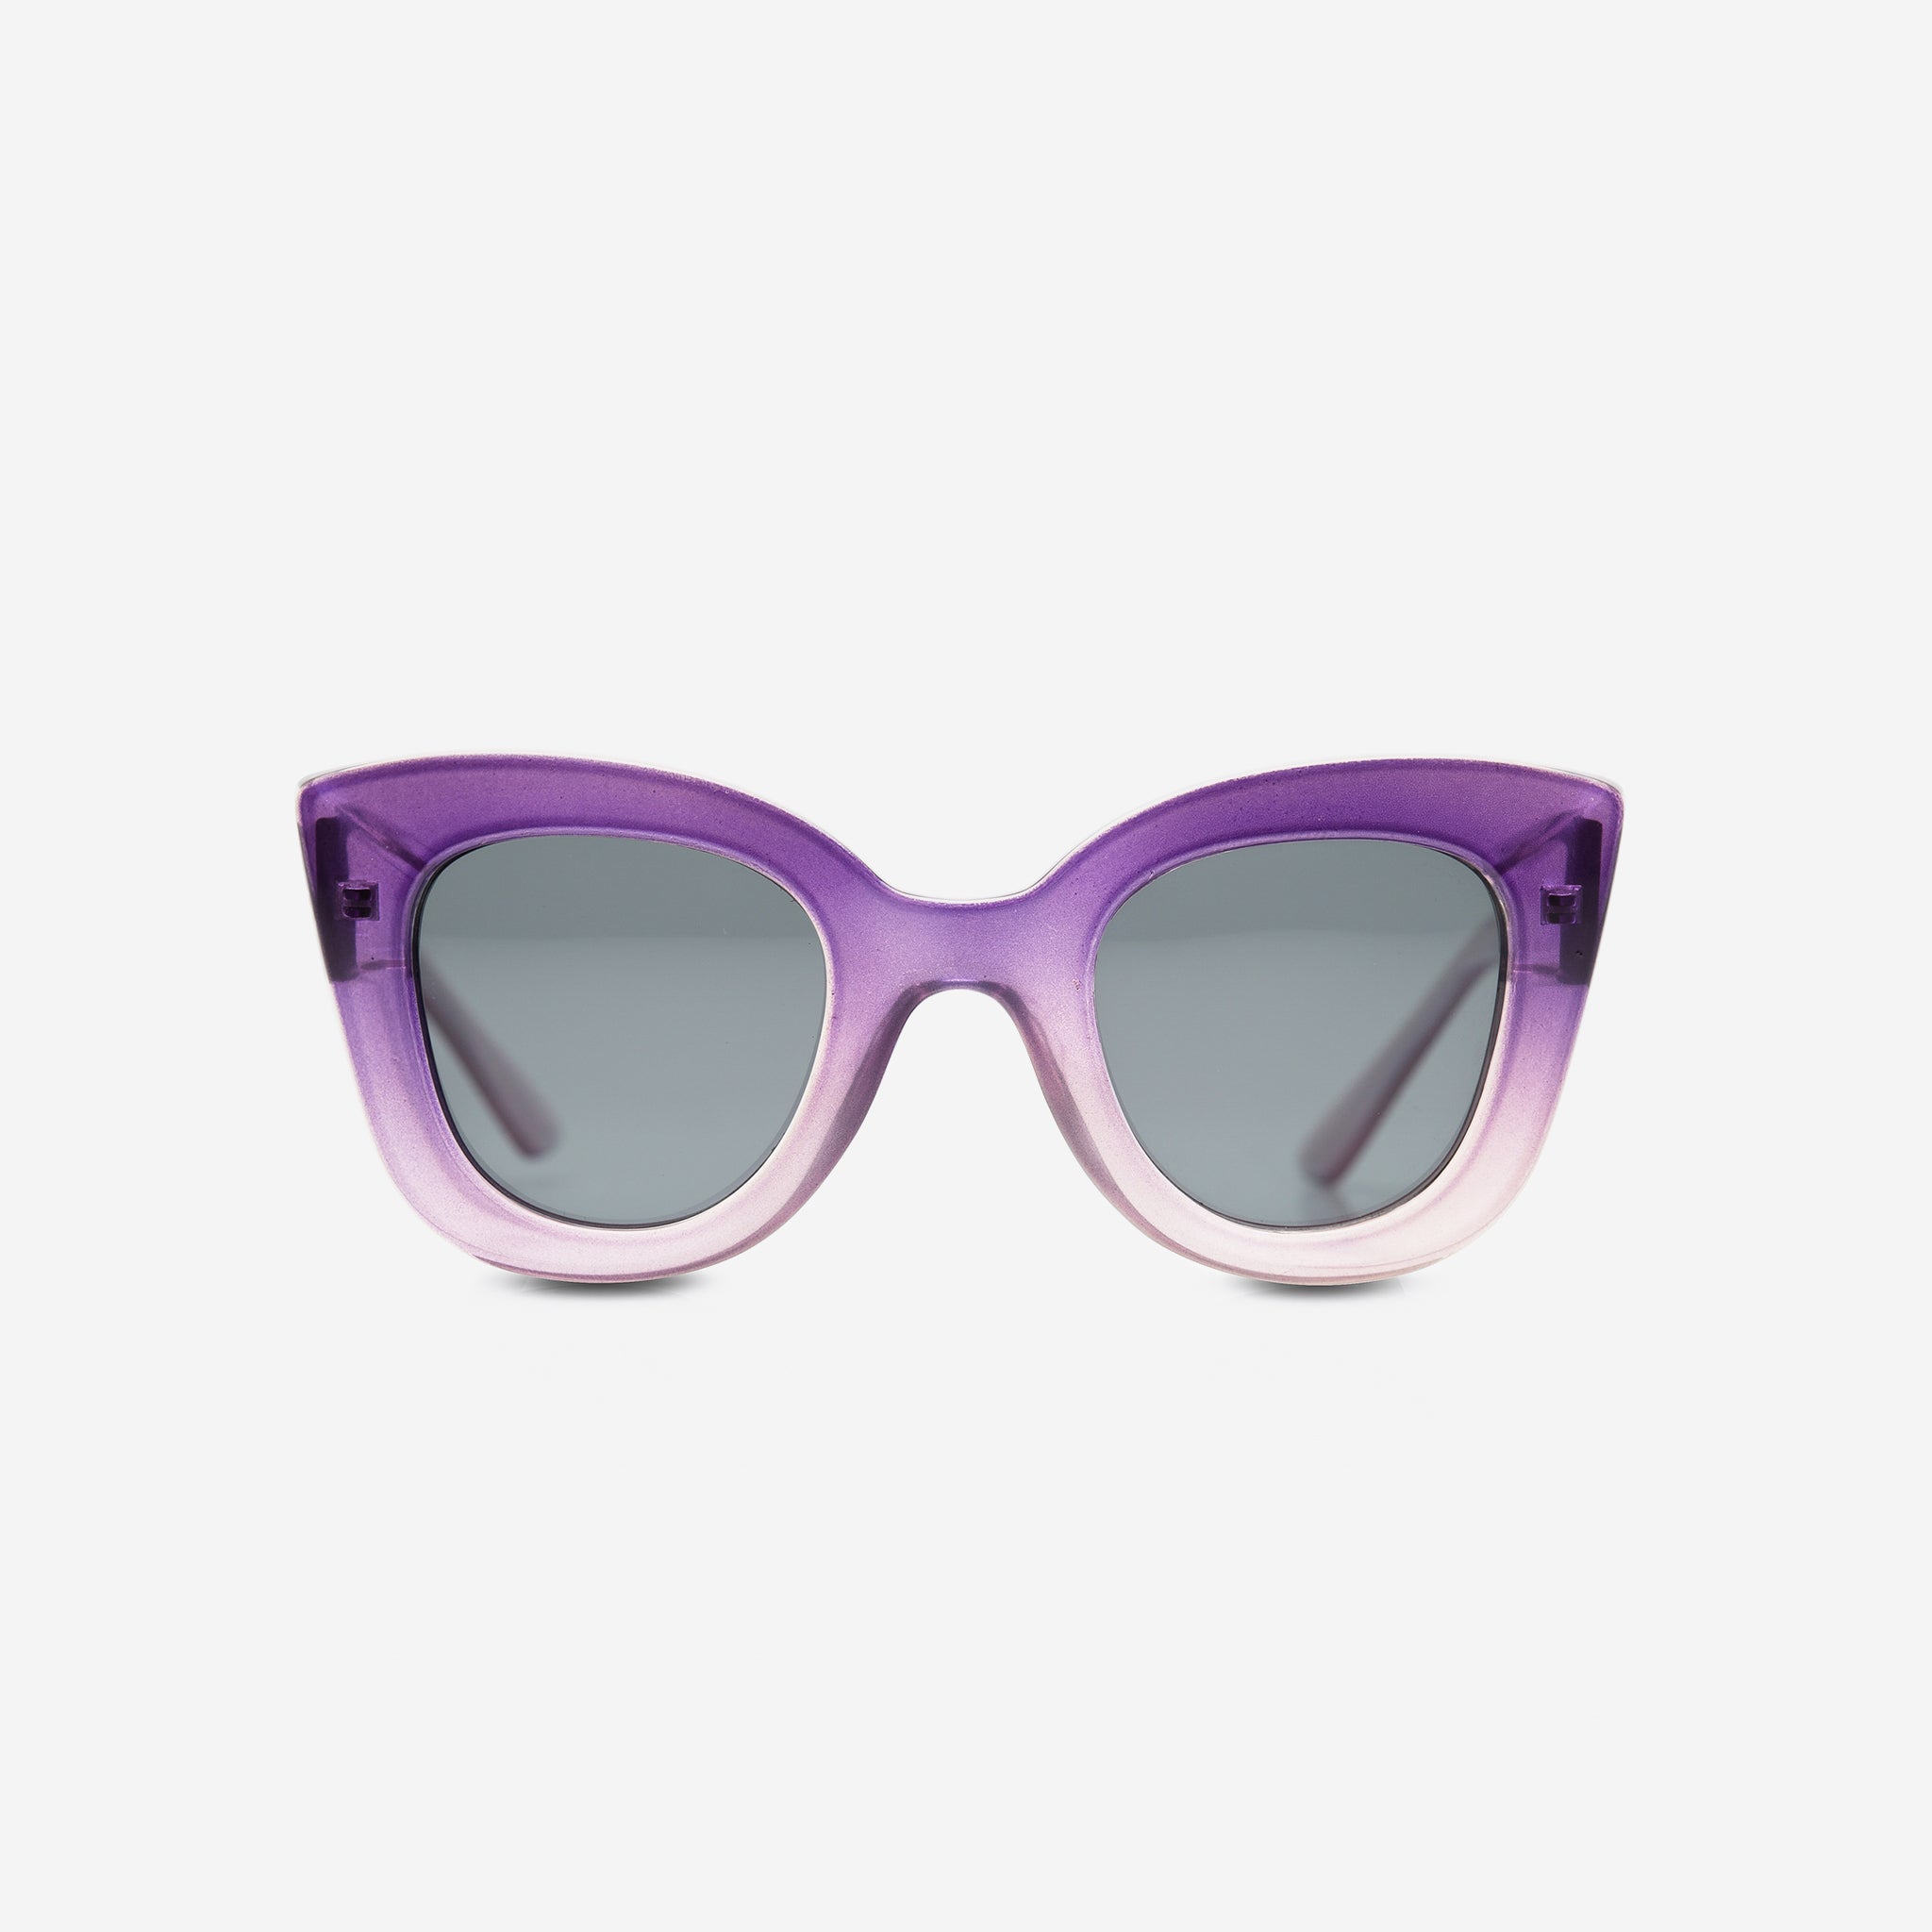 Buy Kids Cat Ears Sunglasses For Summers - Tinyjumps